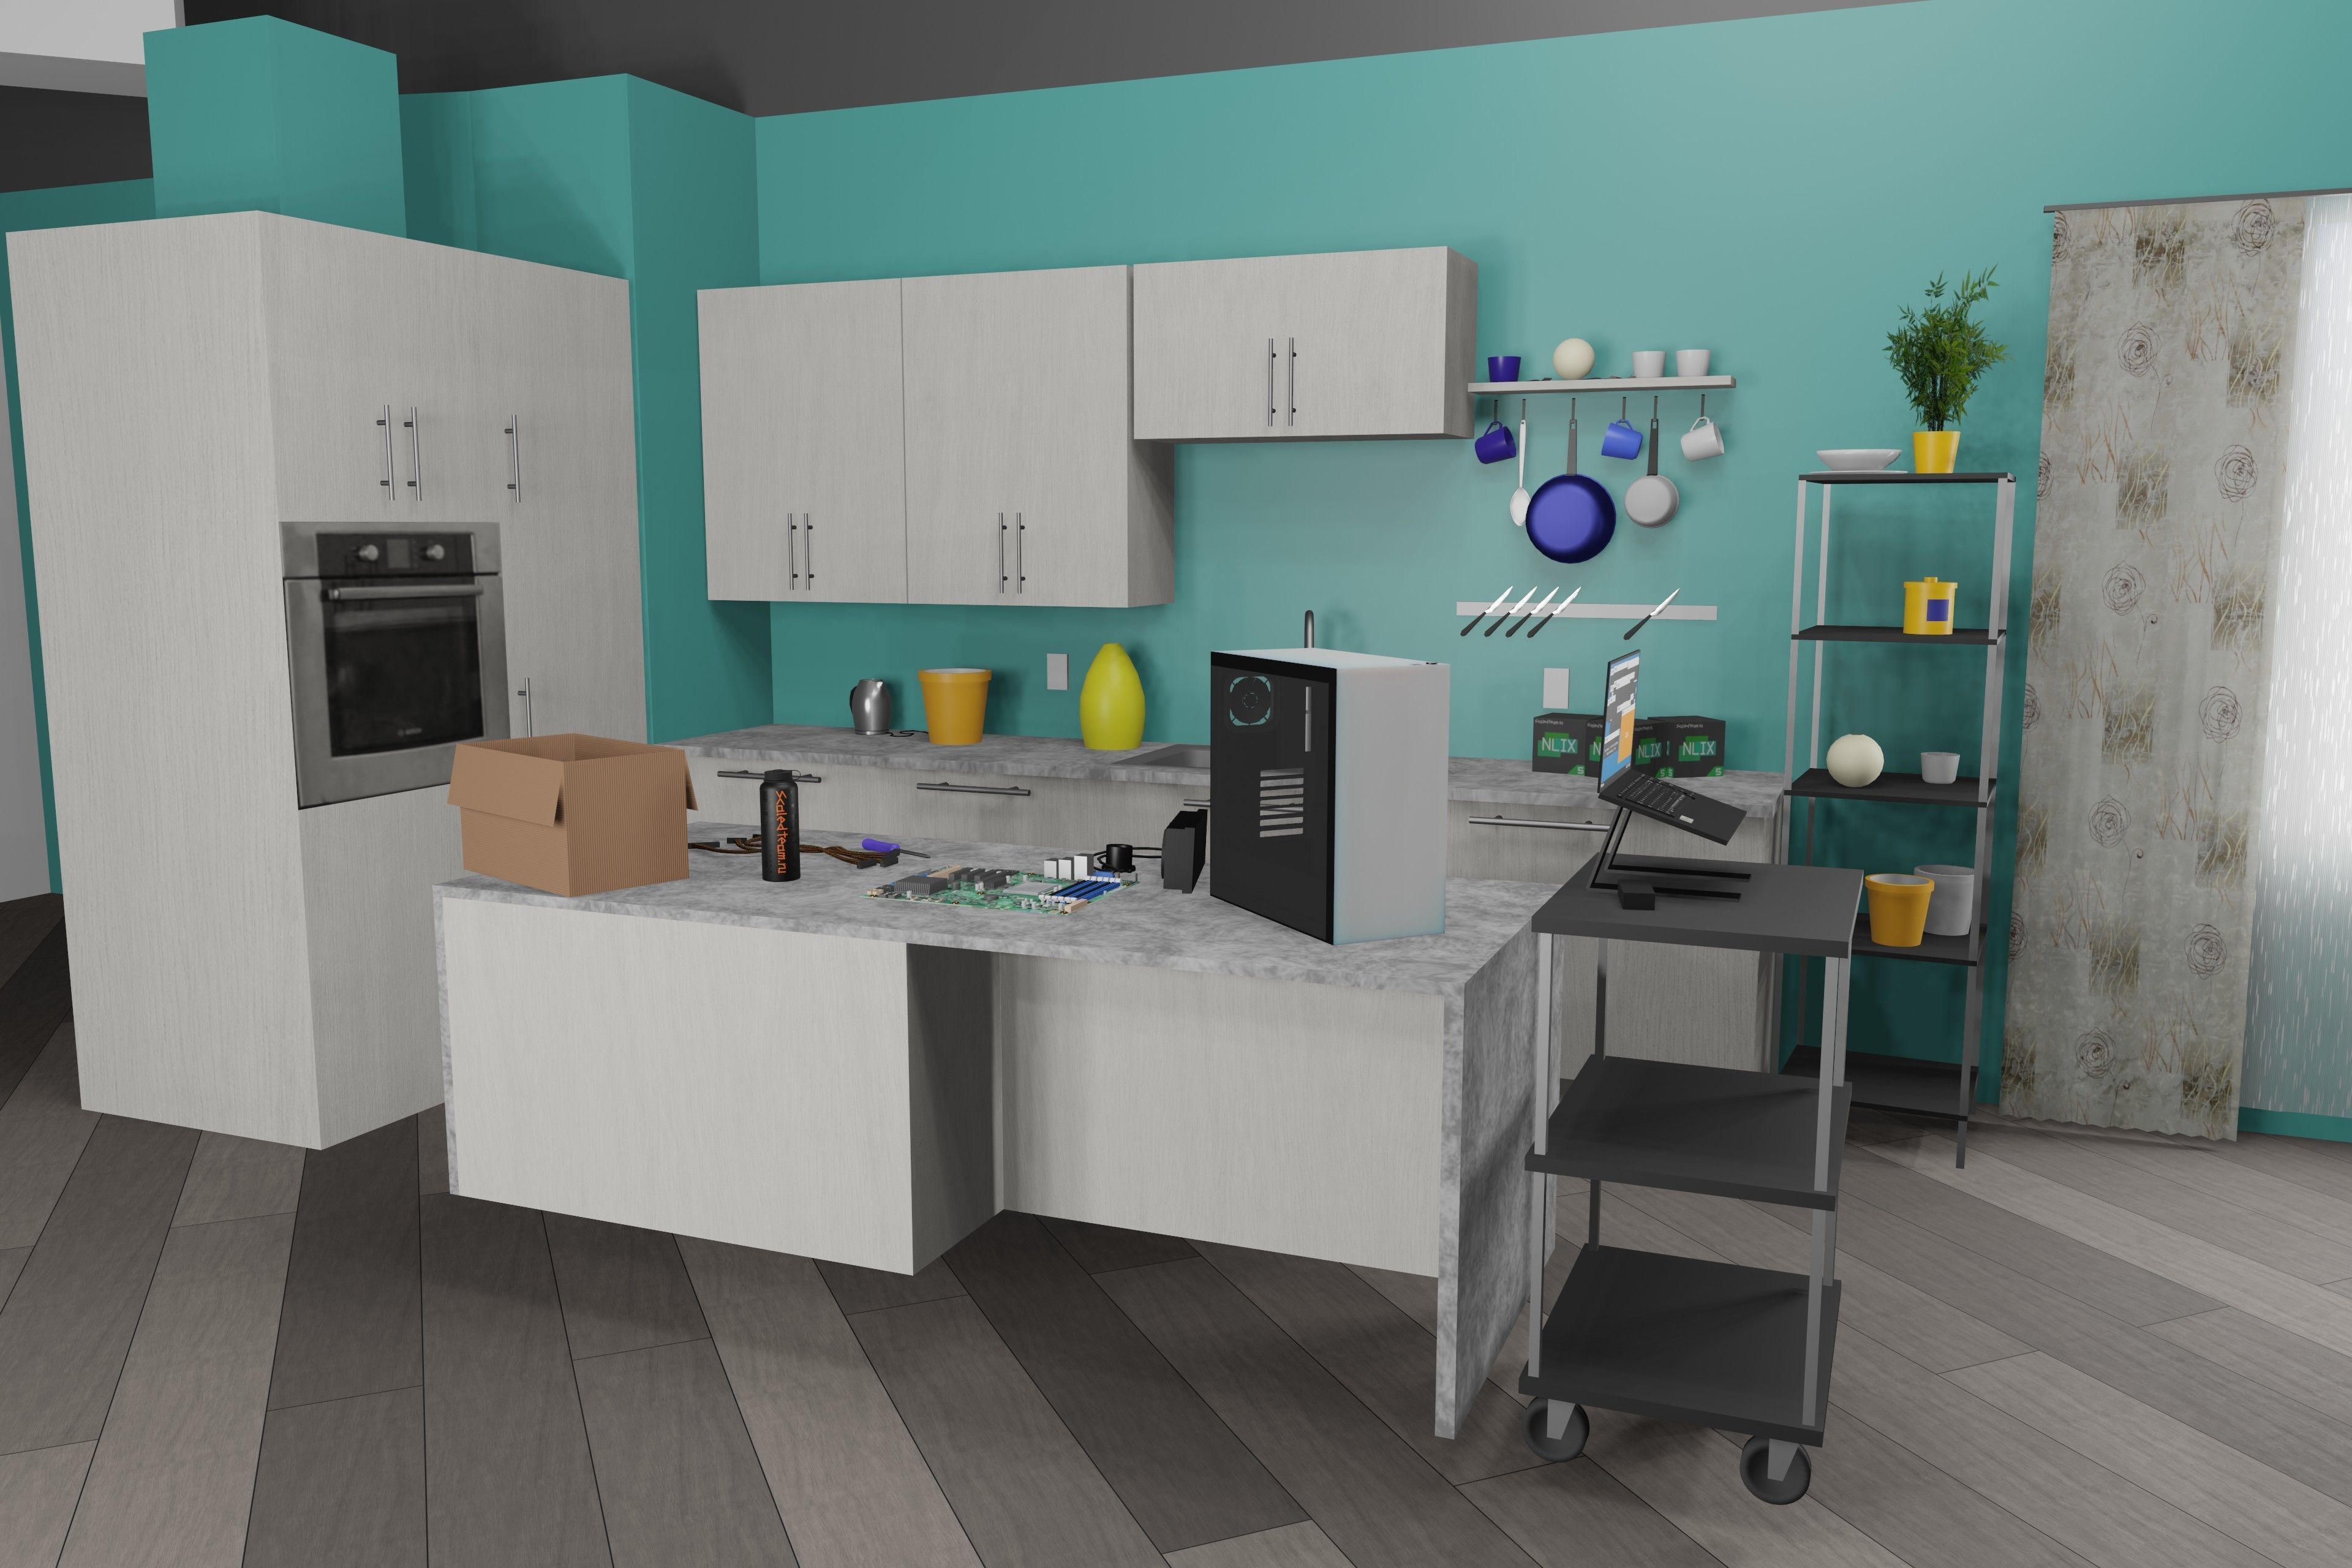 LinusTechTips Studio Kitchen preview image 1